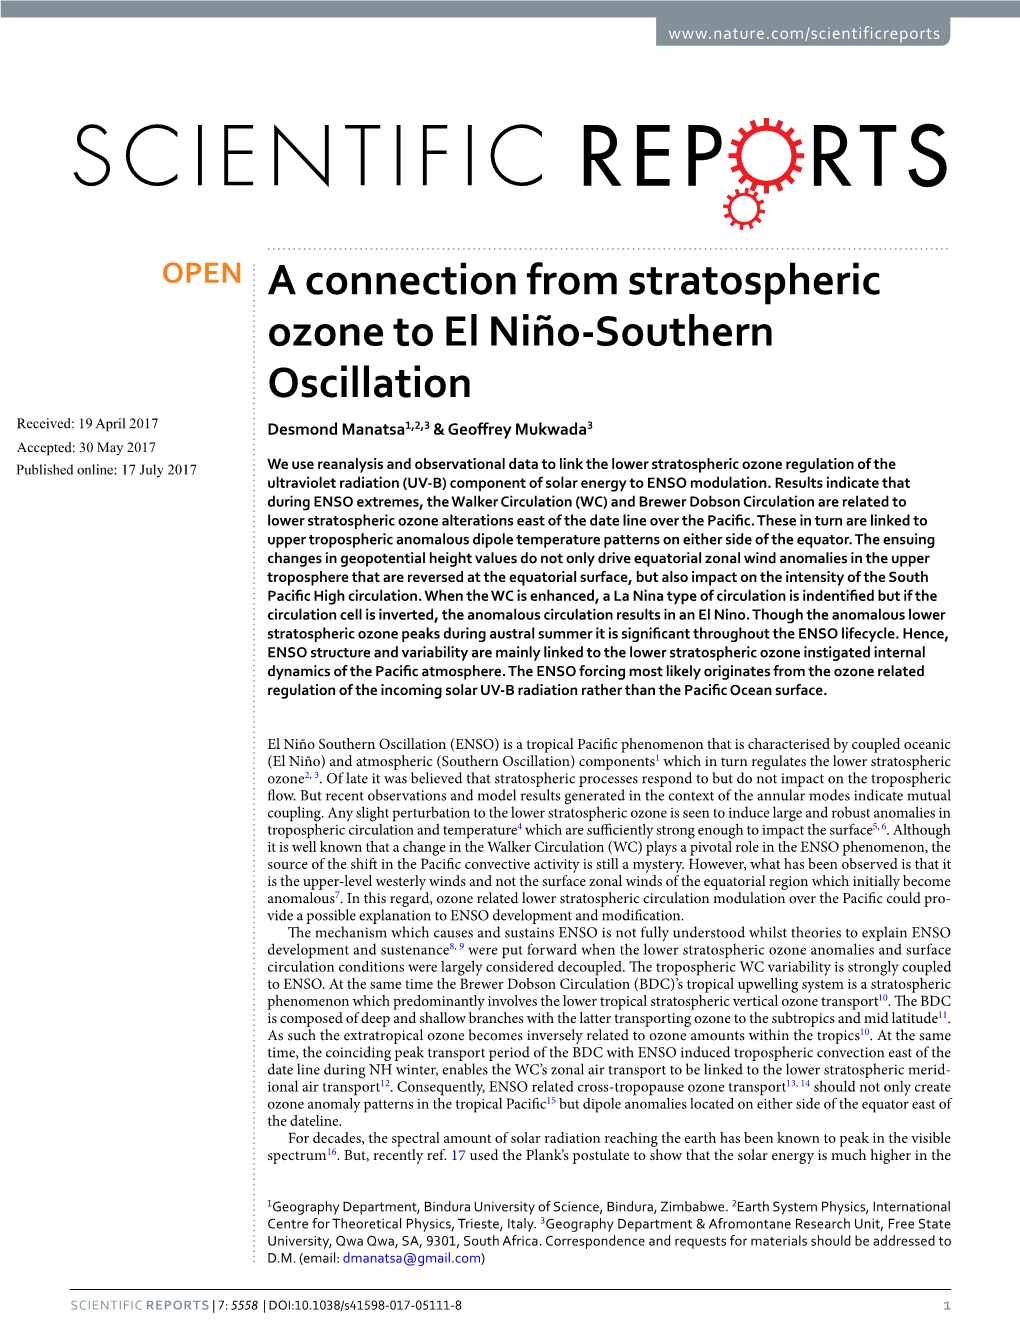 A Connection from Stratospheric Ozone to El Niño-Southern Oscillation